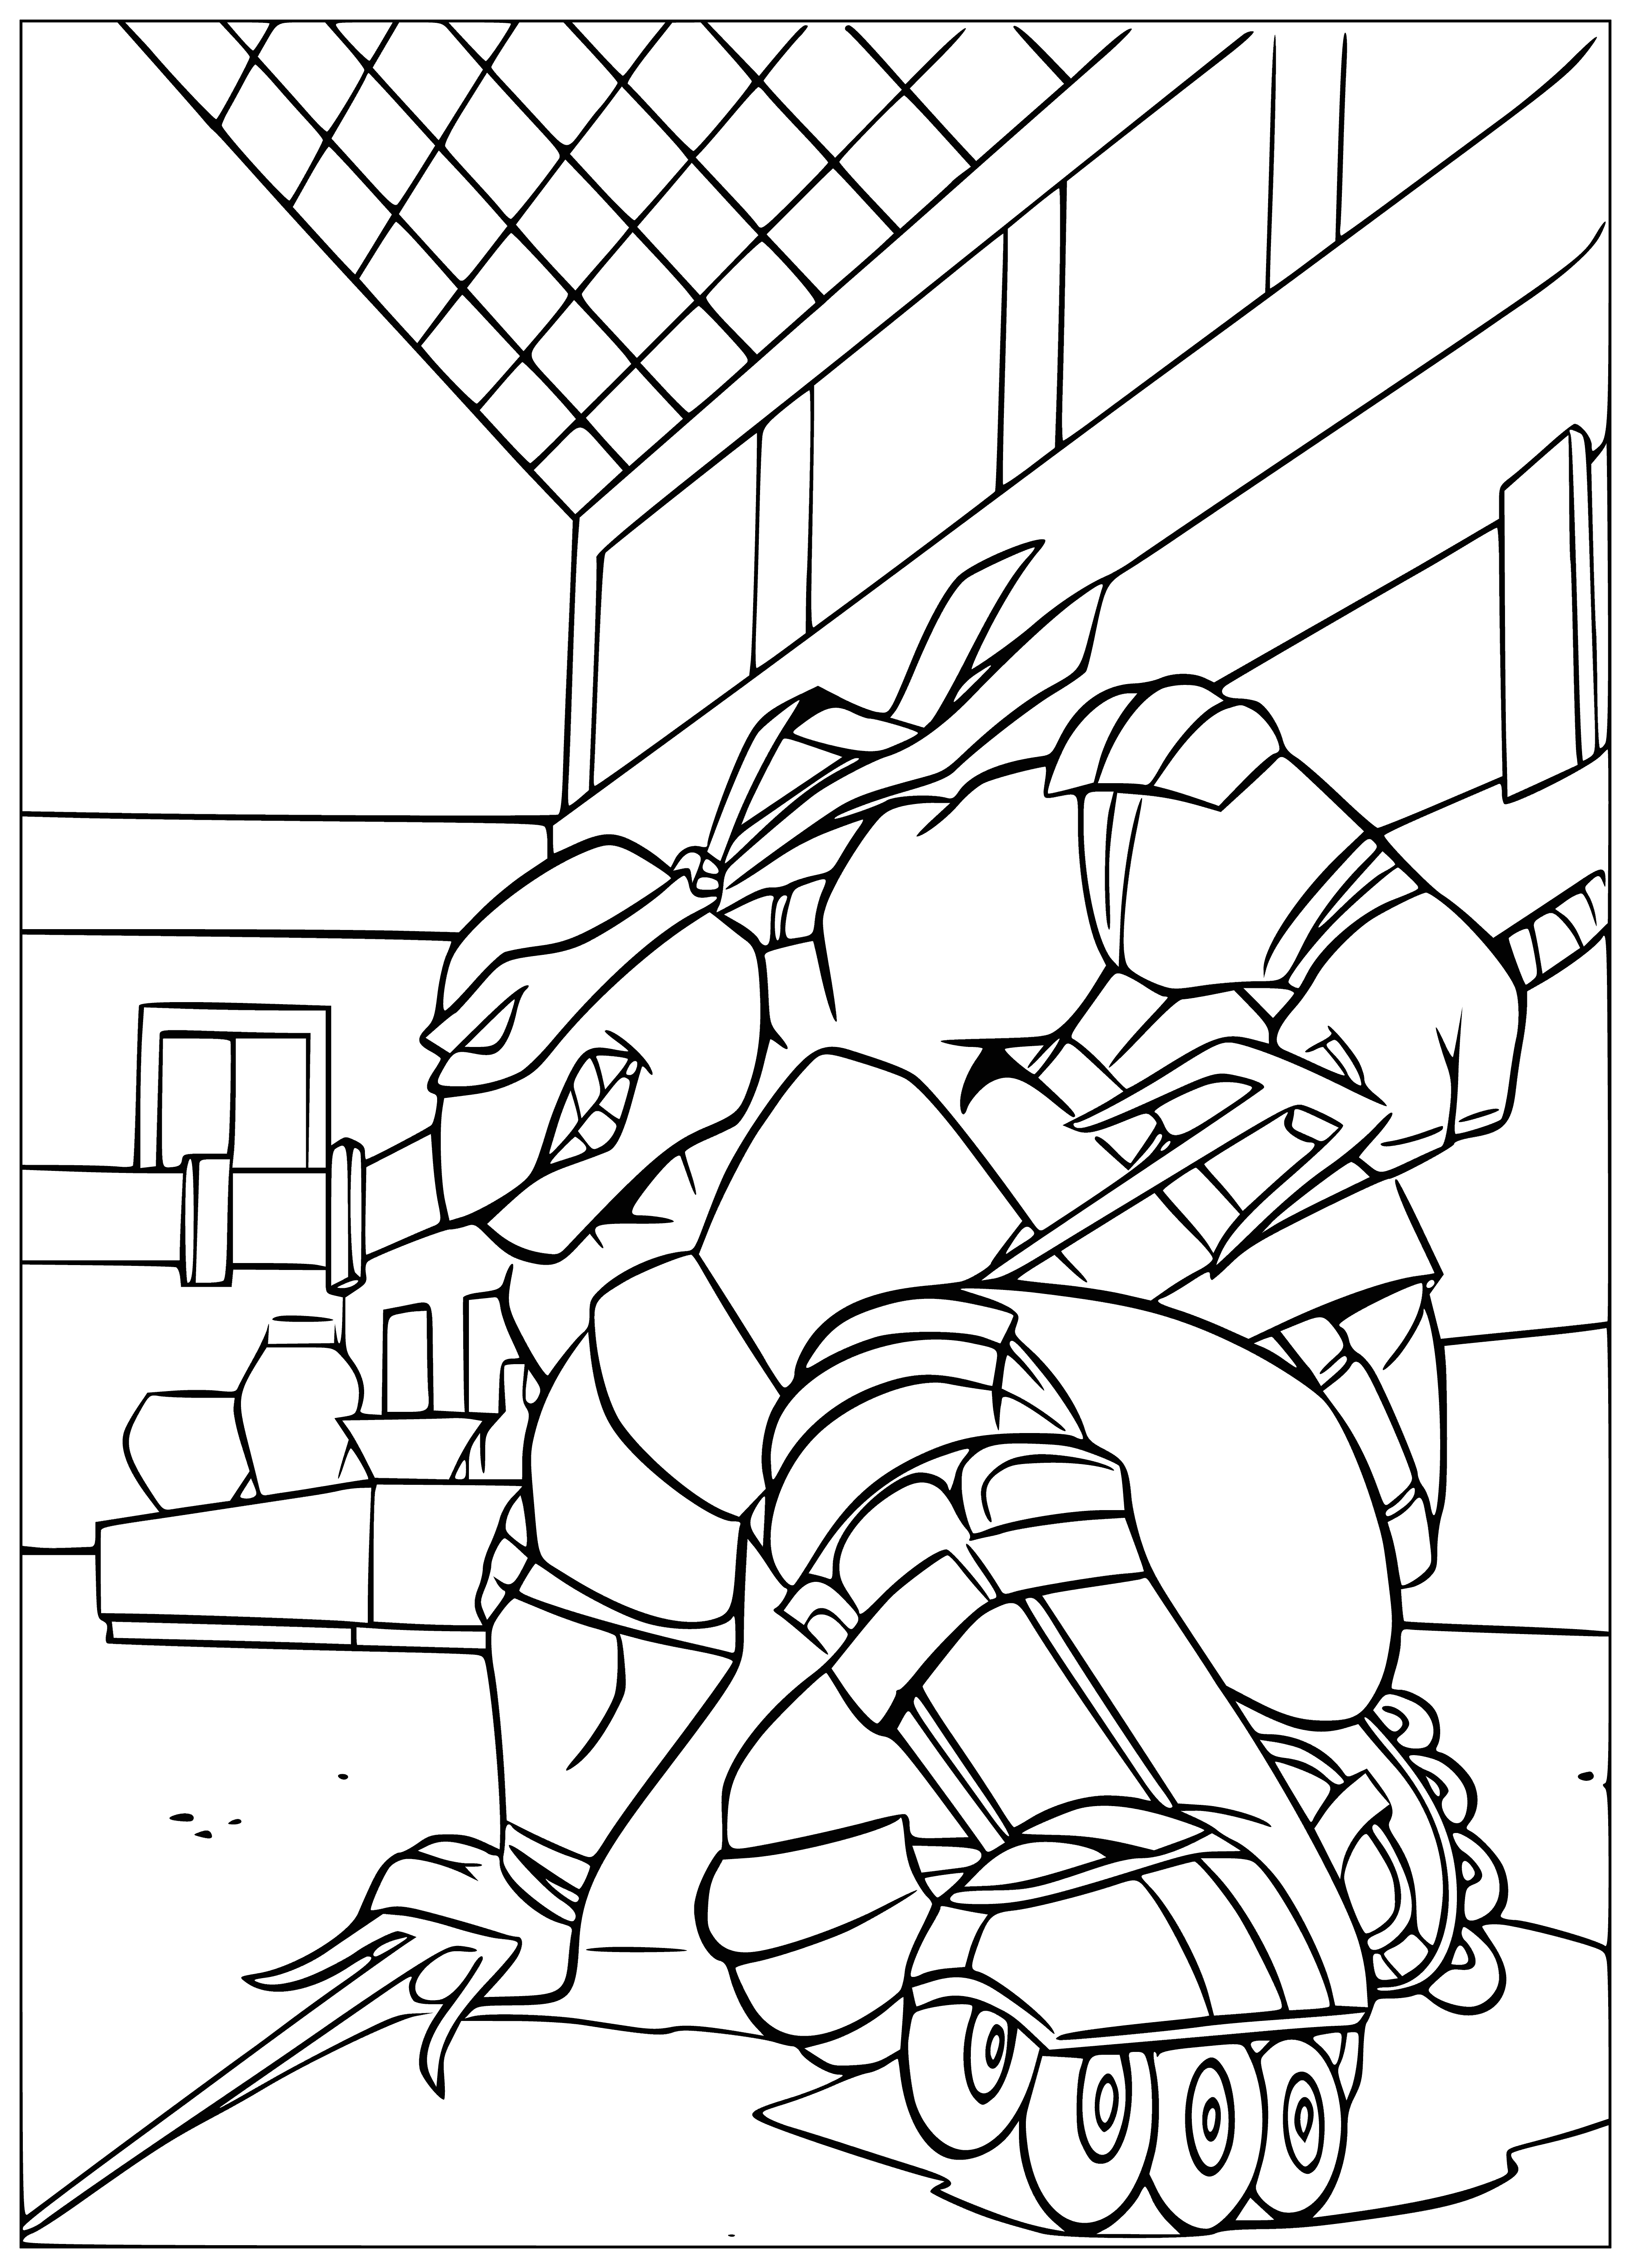 Raphael on rollers coloring page